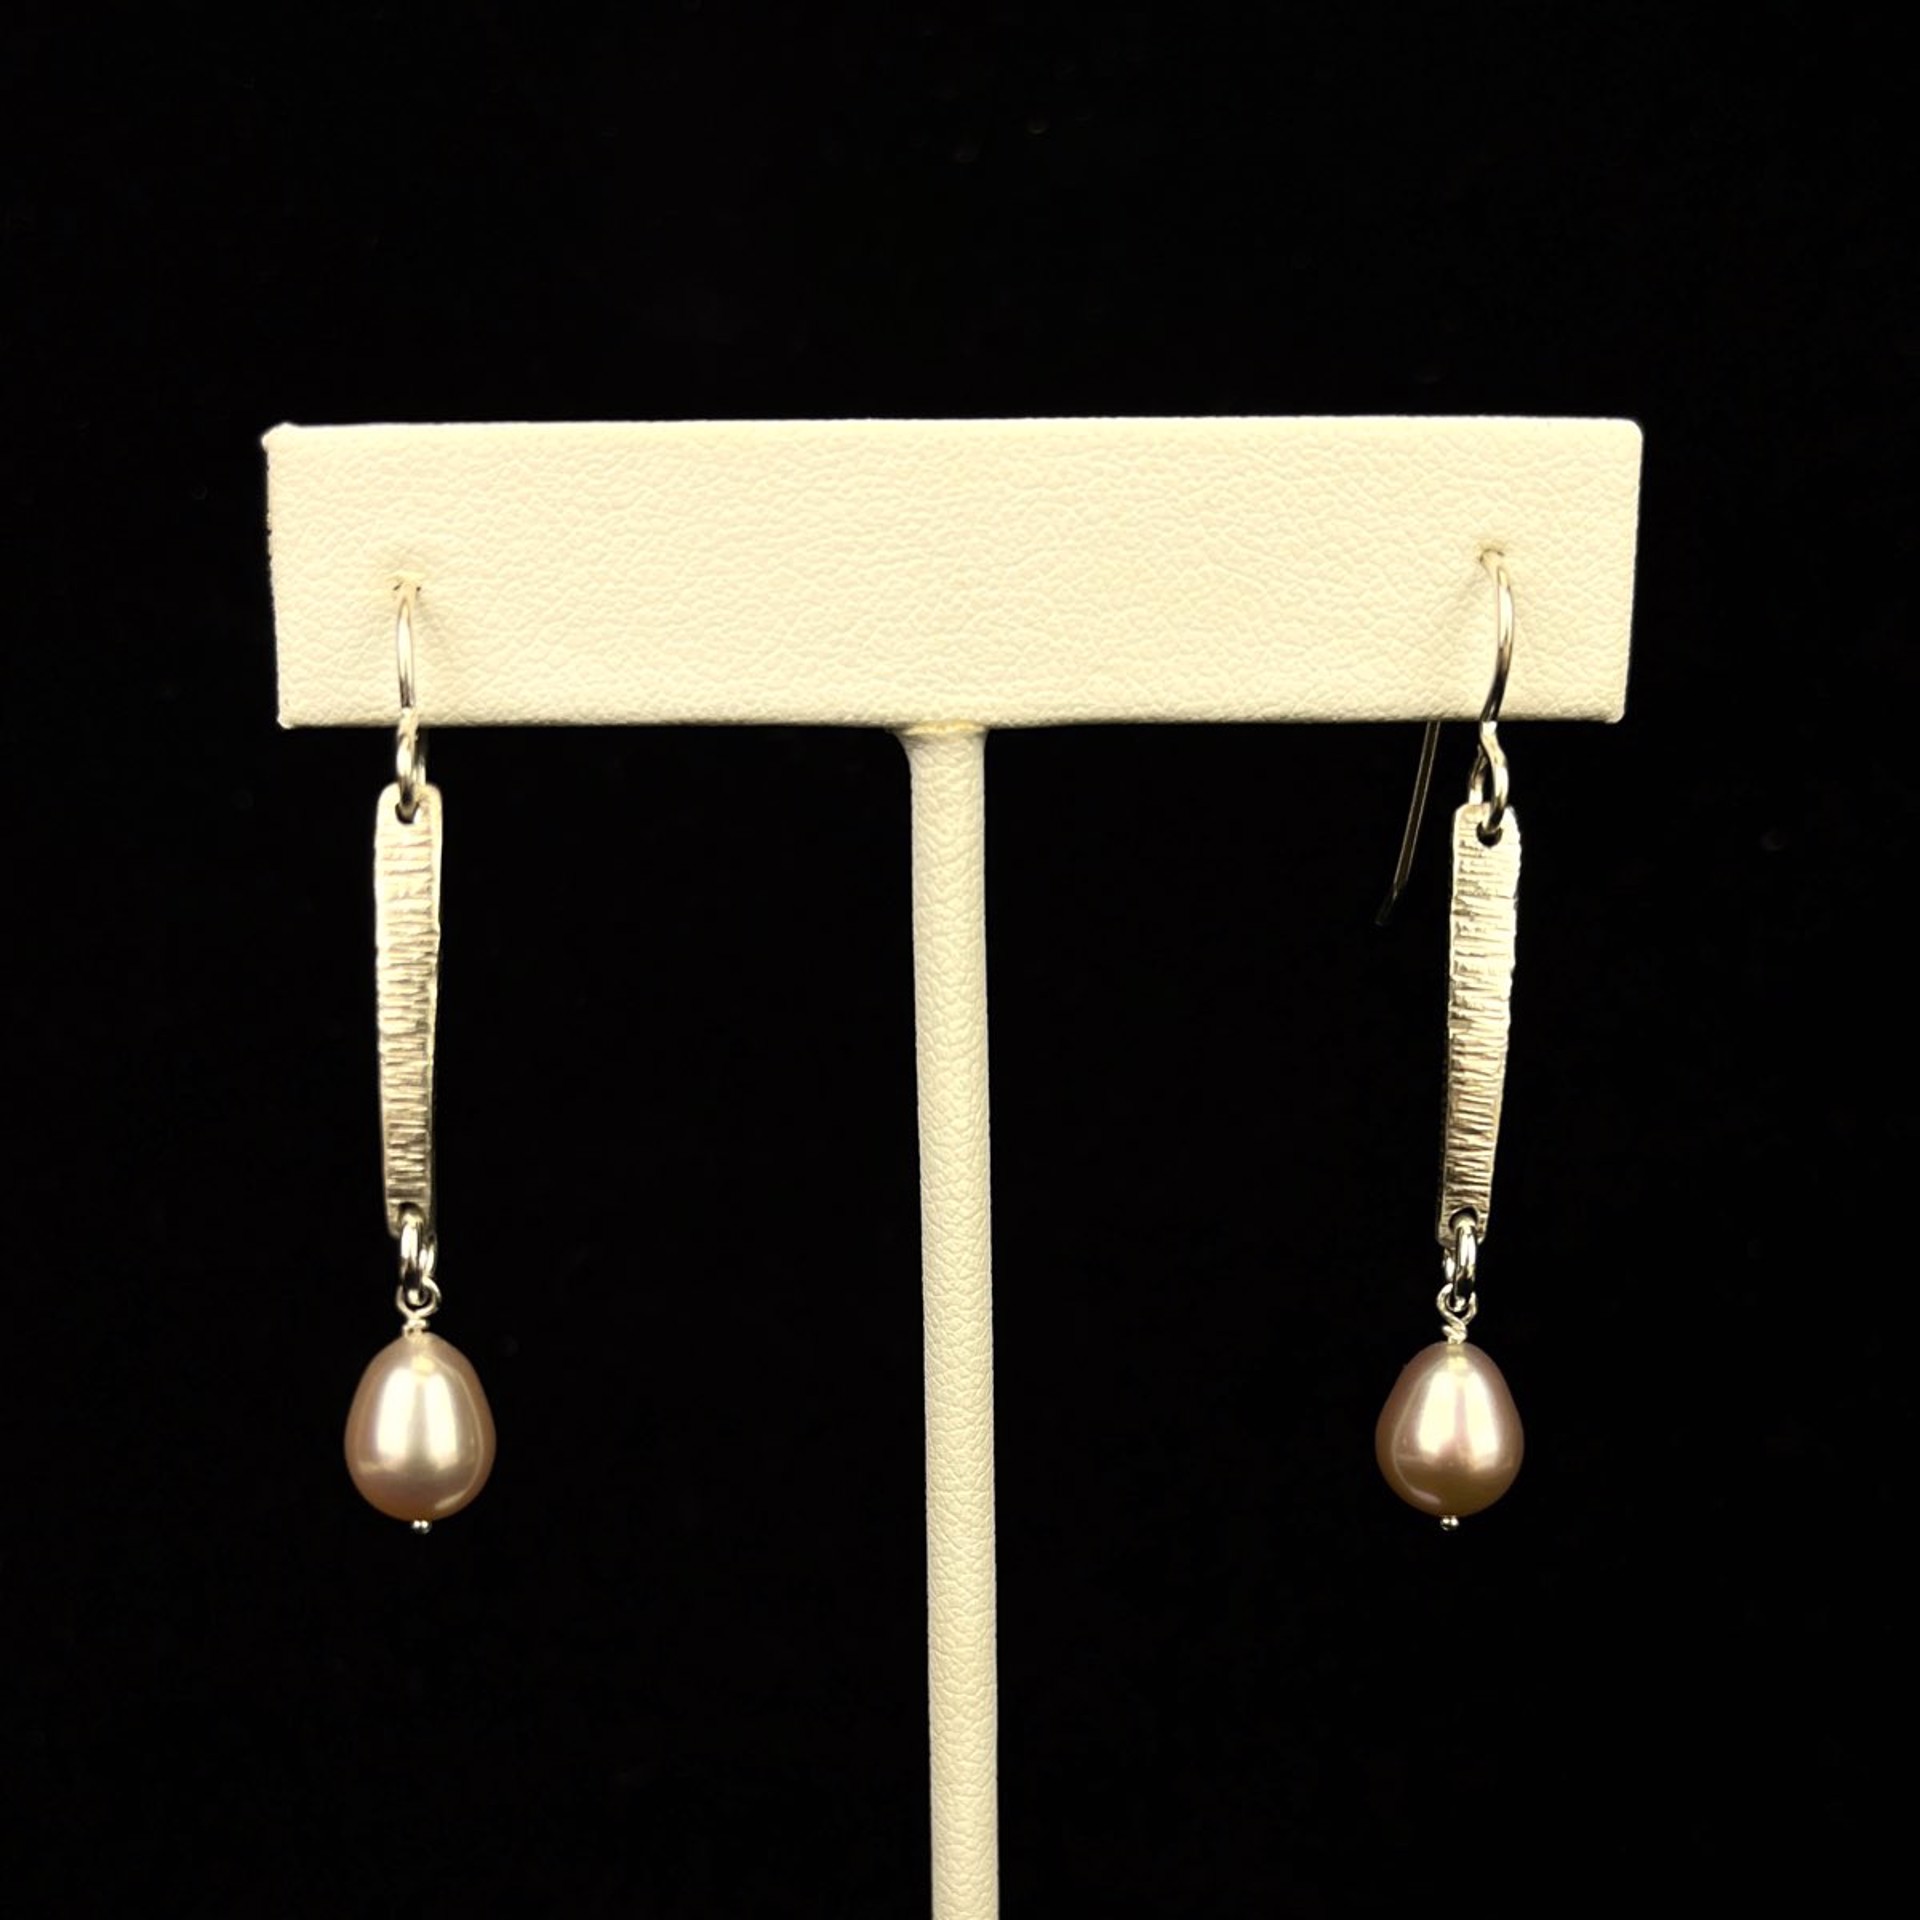 Textured Rectangle with Pearl Sterling Earrings by Nichole Collins